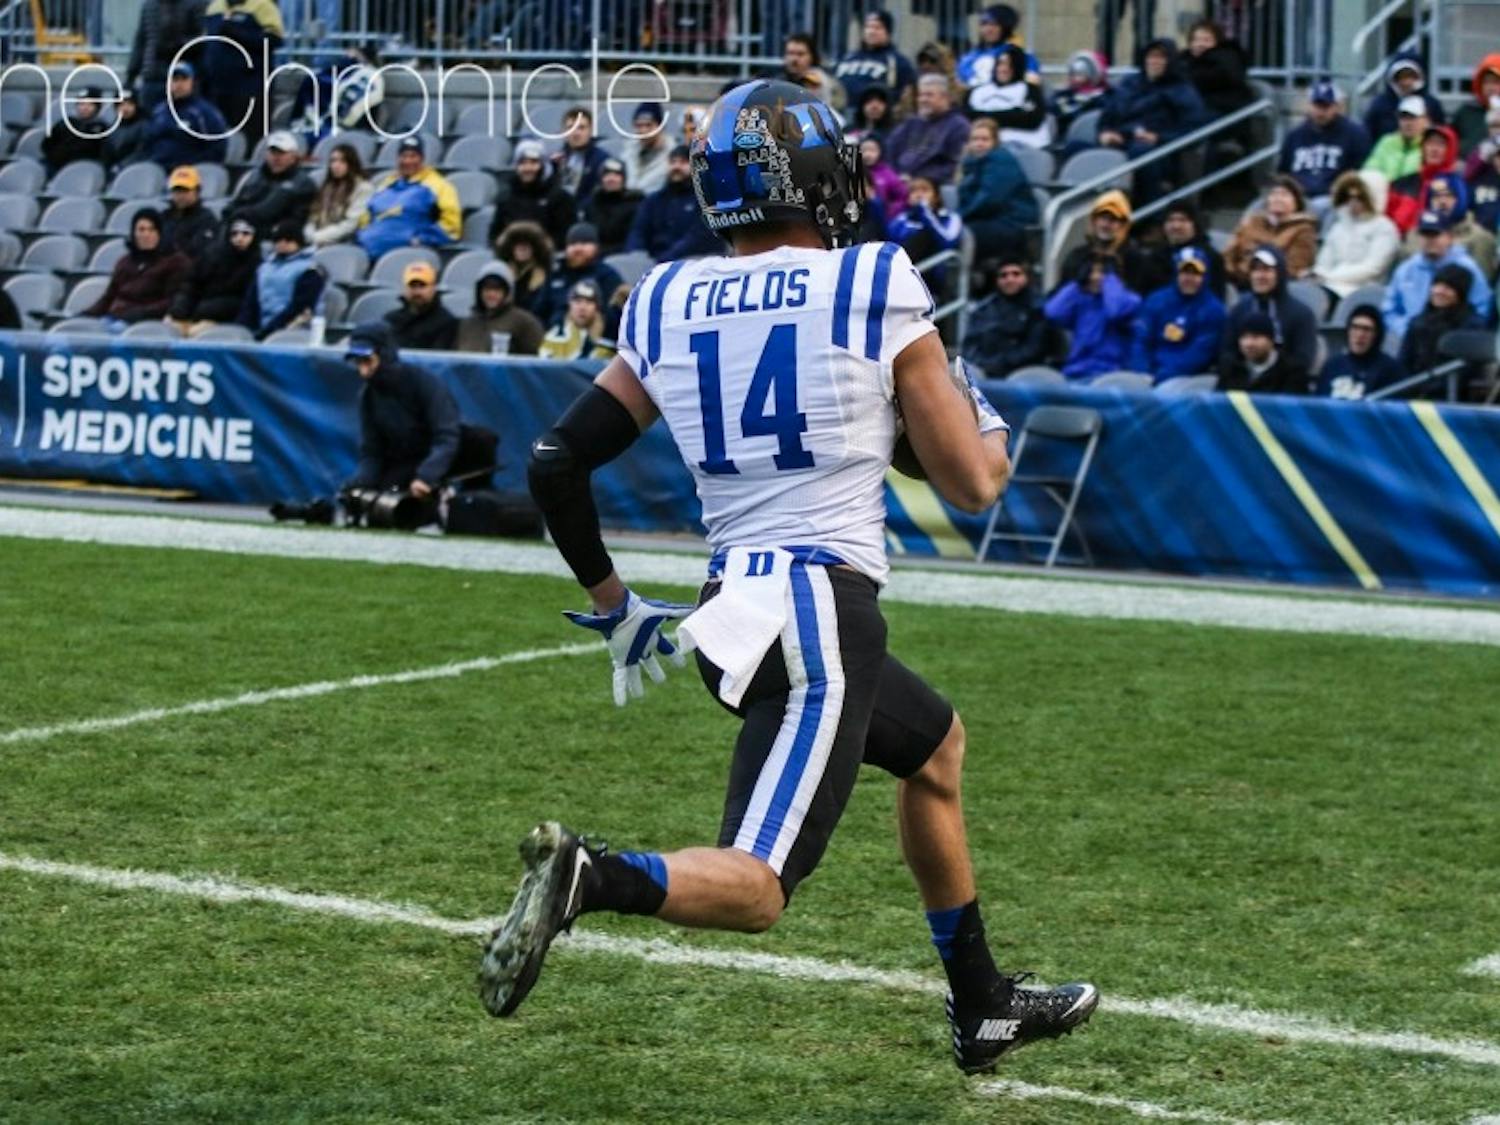 Redshirt senior cornerback&nbsp;Bryon Fields is the only player left on Duke's roster that appeared in the 2013 ACC championship game.